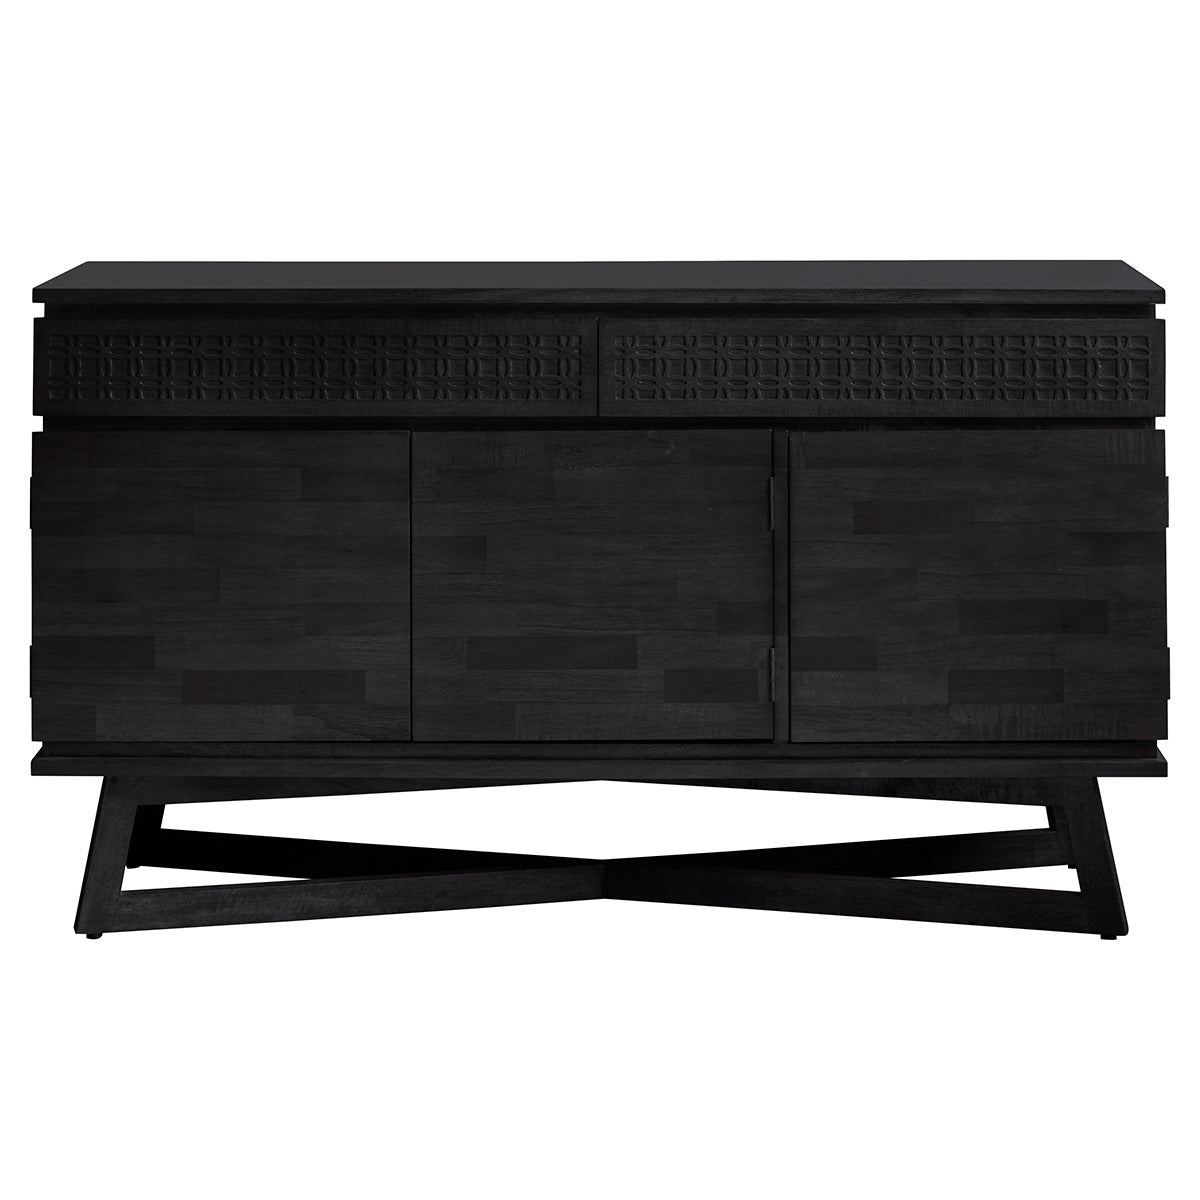 A black Dartington Boutique sideboard with two drawers and two legs, perfect for home furniture and interior décor.